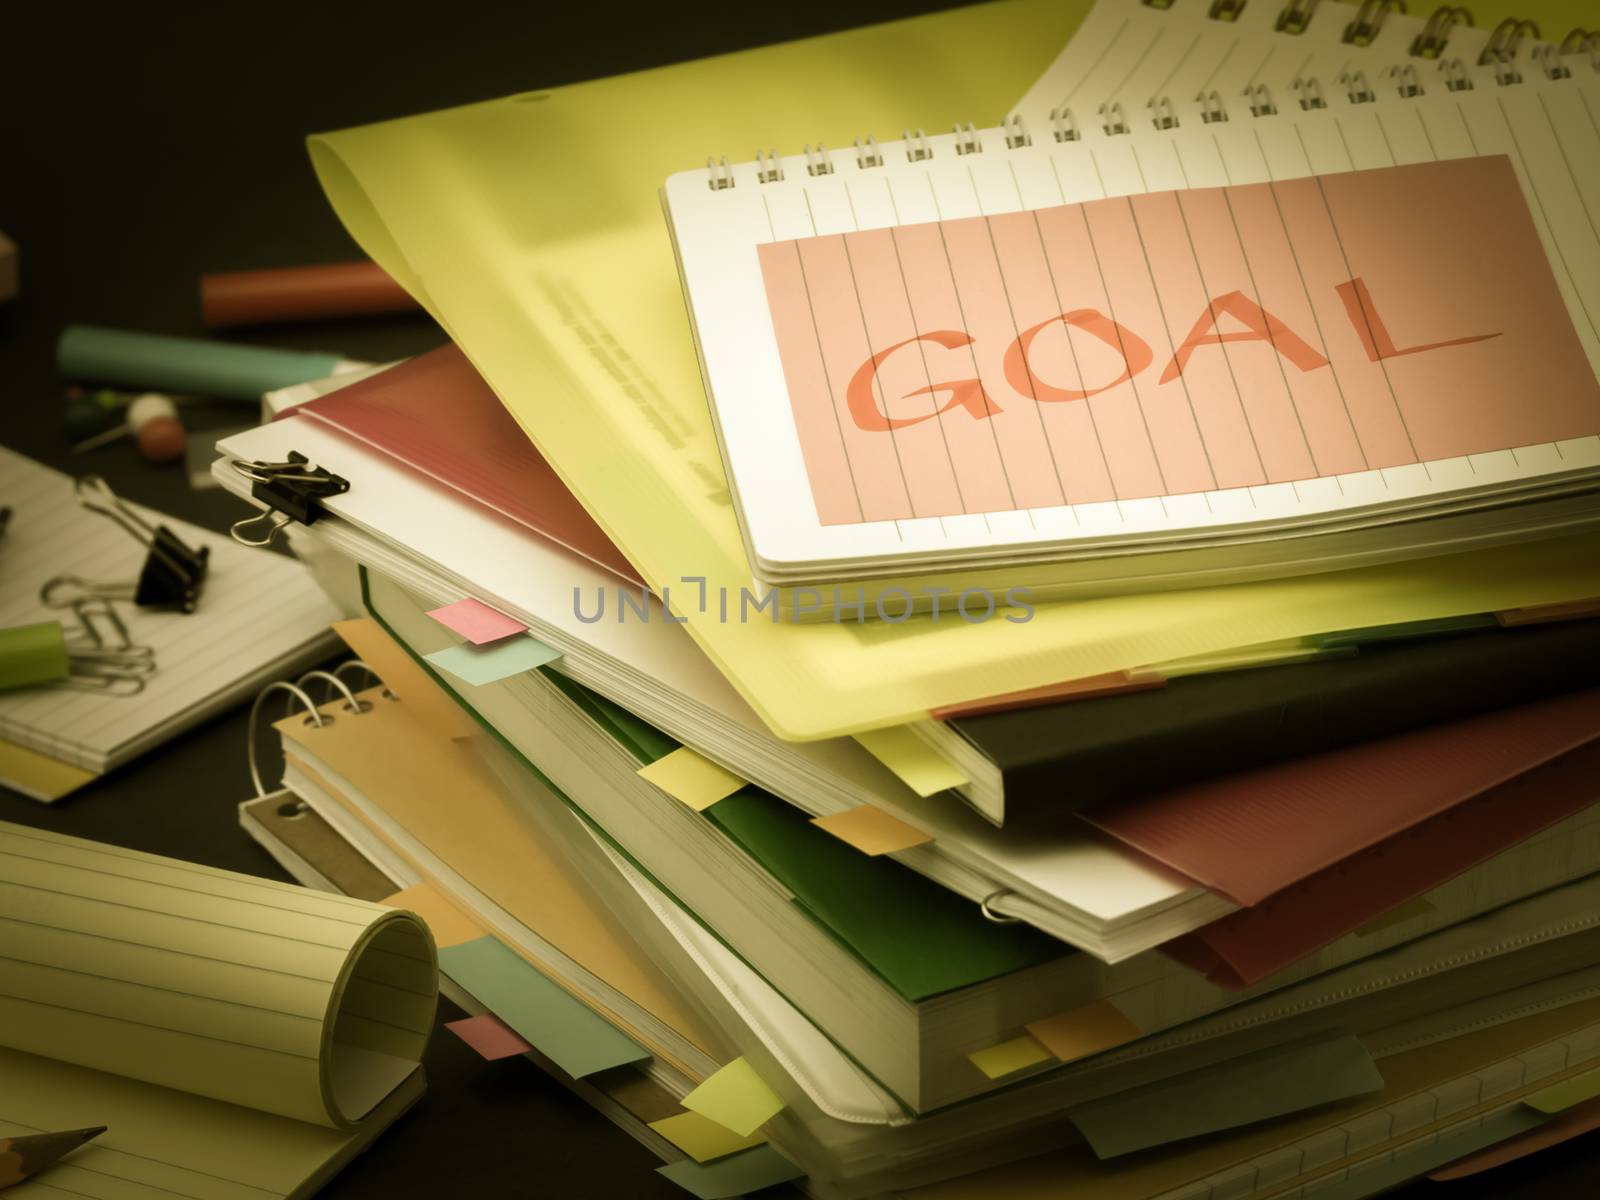 The Pile of Business Documents; Goal by EikoTsuttiy